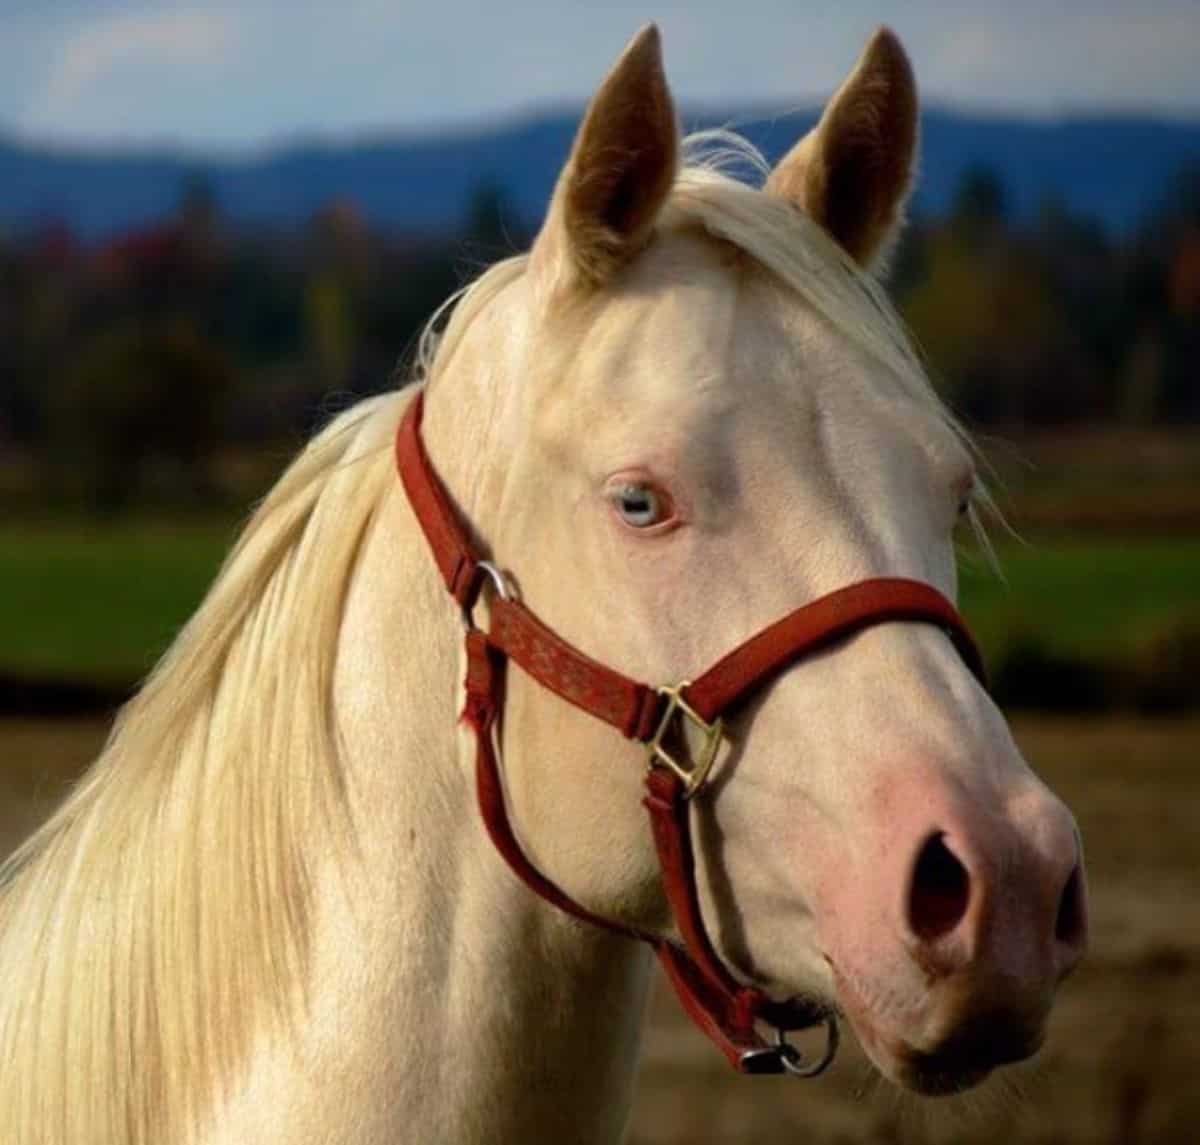 A white horse with blue eyes wearing a red halter.